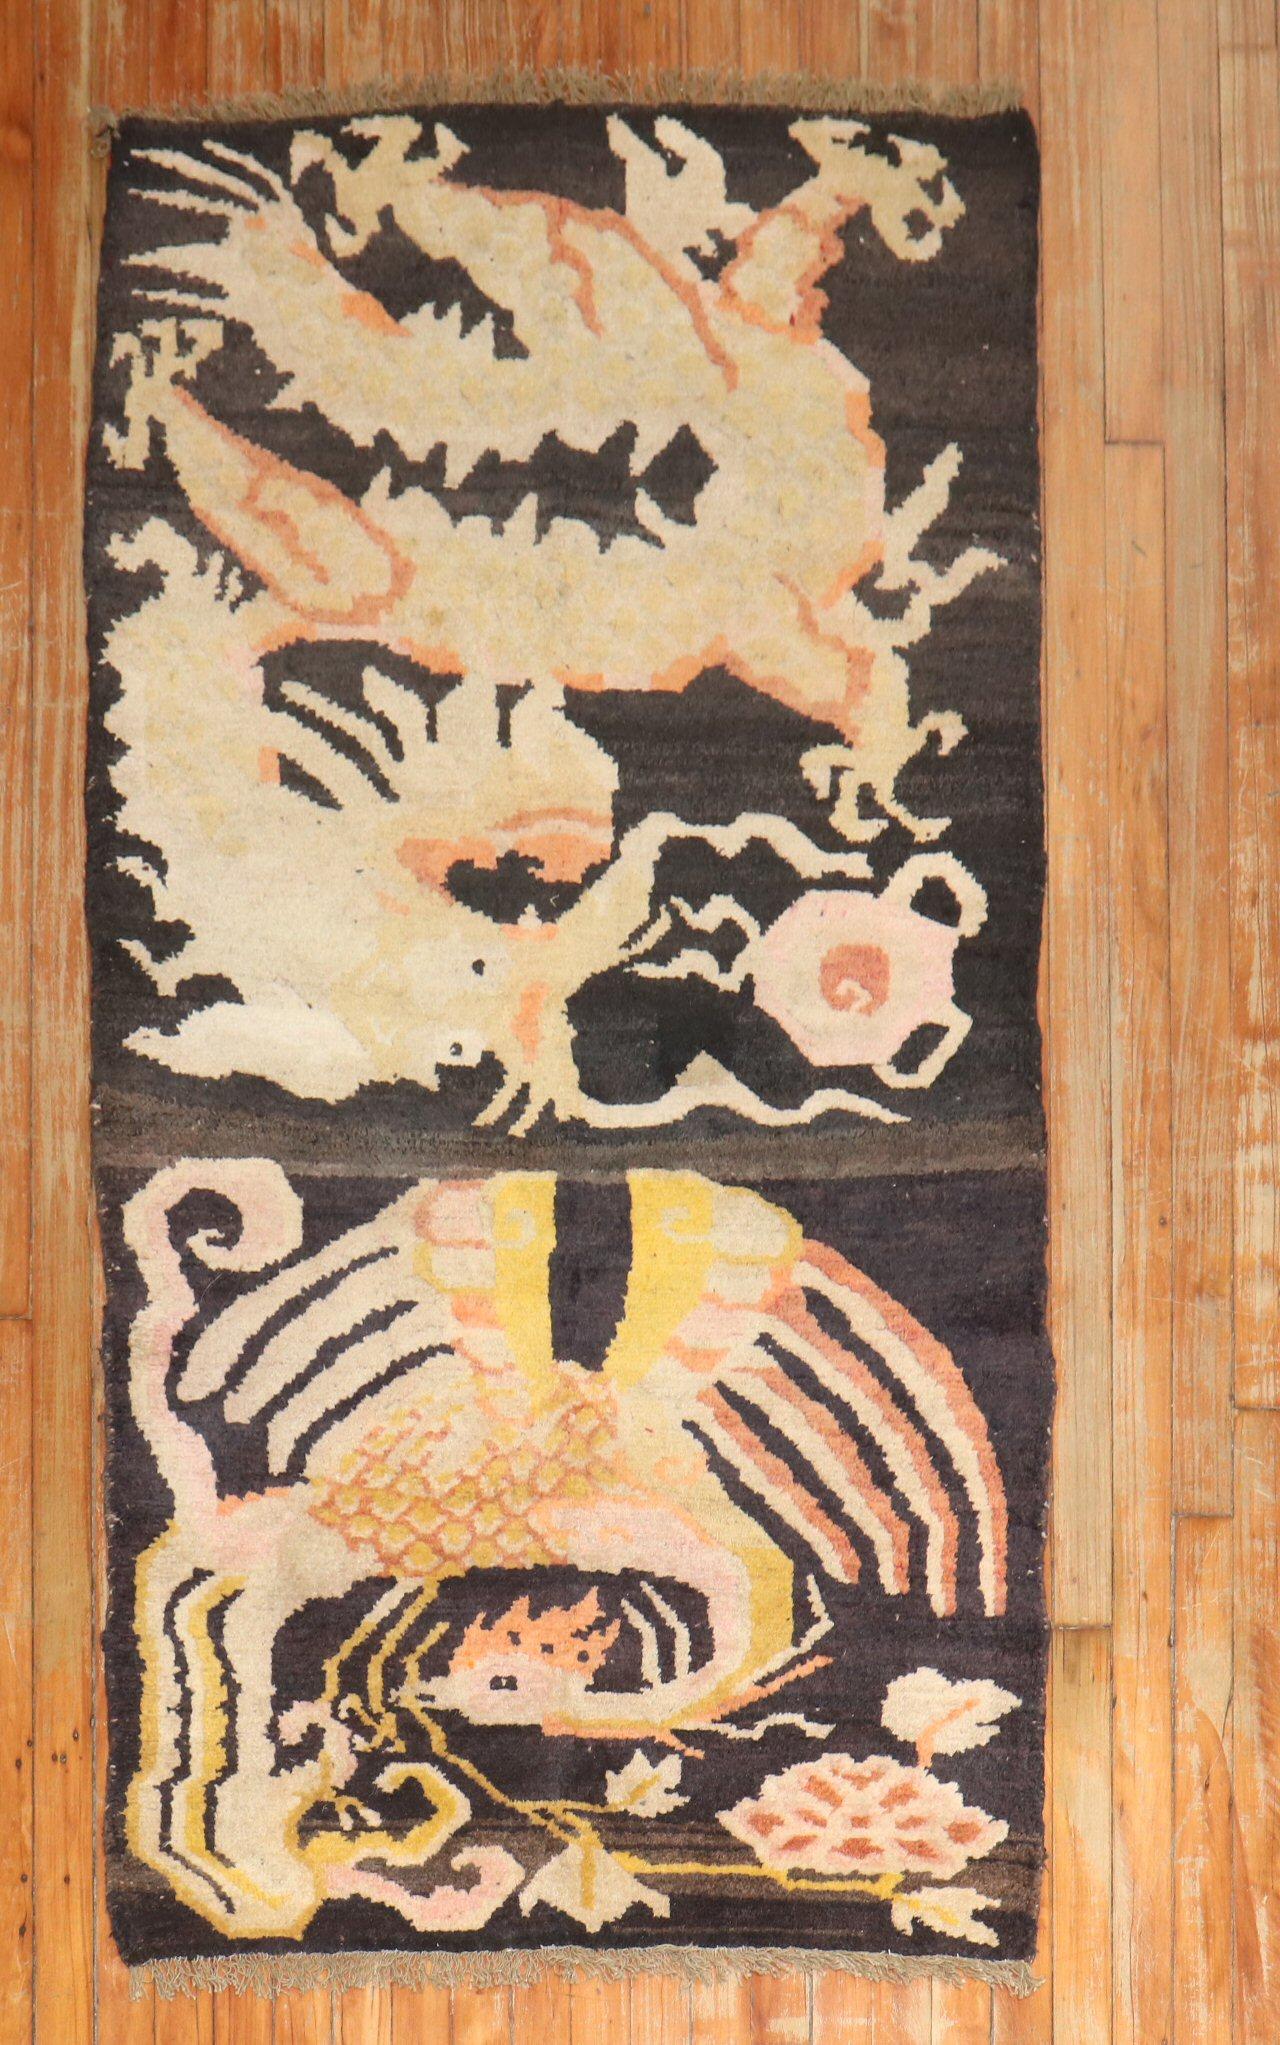 A 2nd quarter of the 20th-century Tibetan rug with a pheonix dragon motif on a brown field

Size: 3' x 5'8''.

